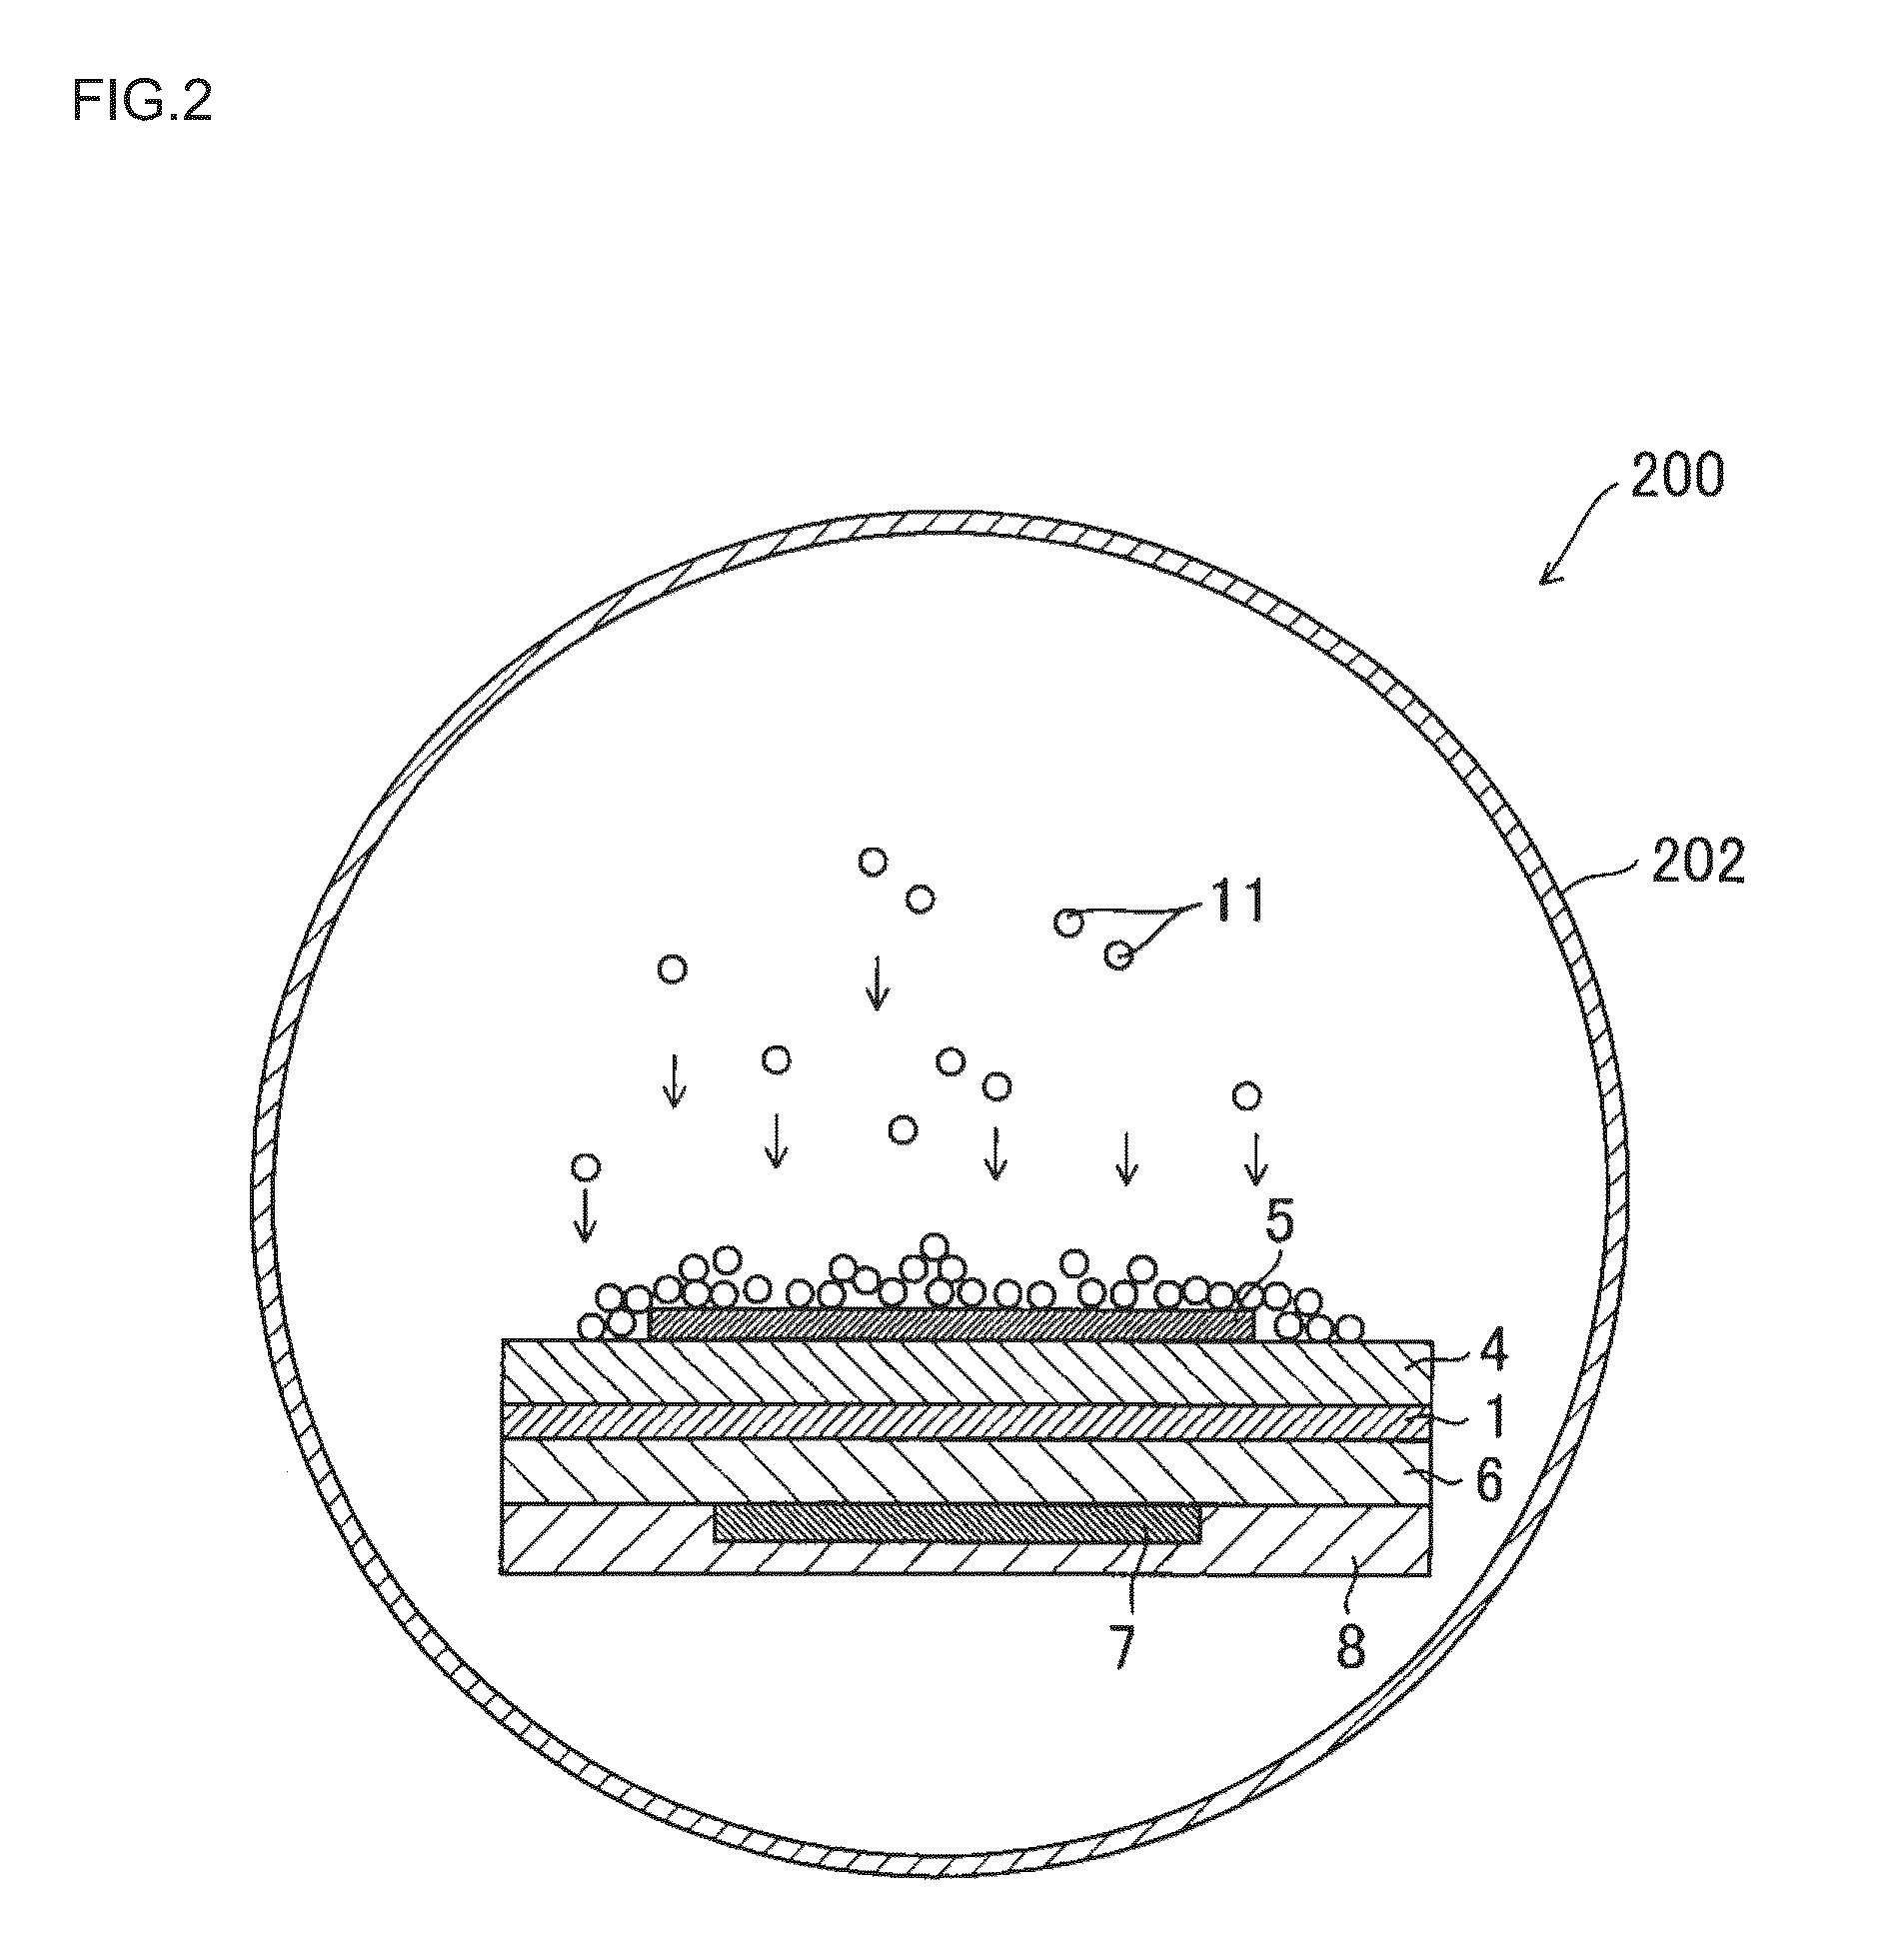 Particulate matter detection device